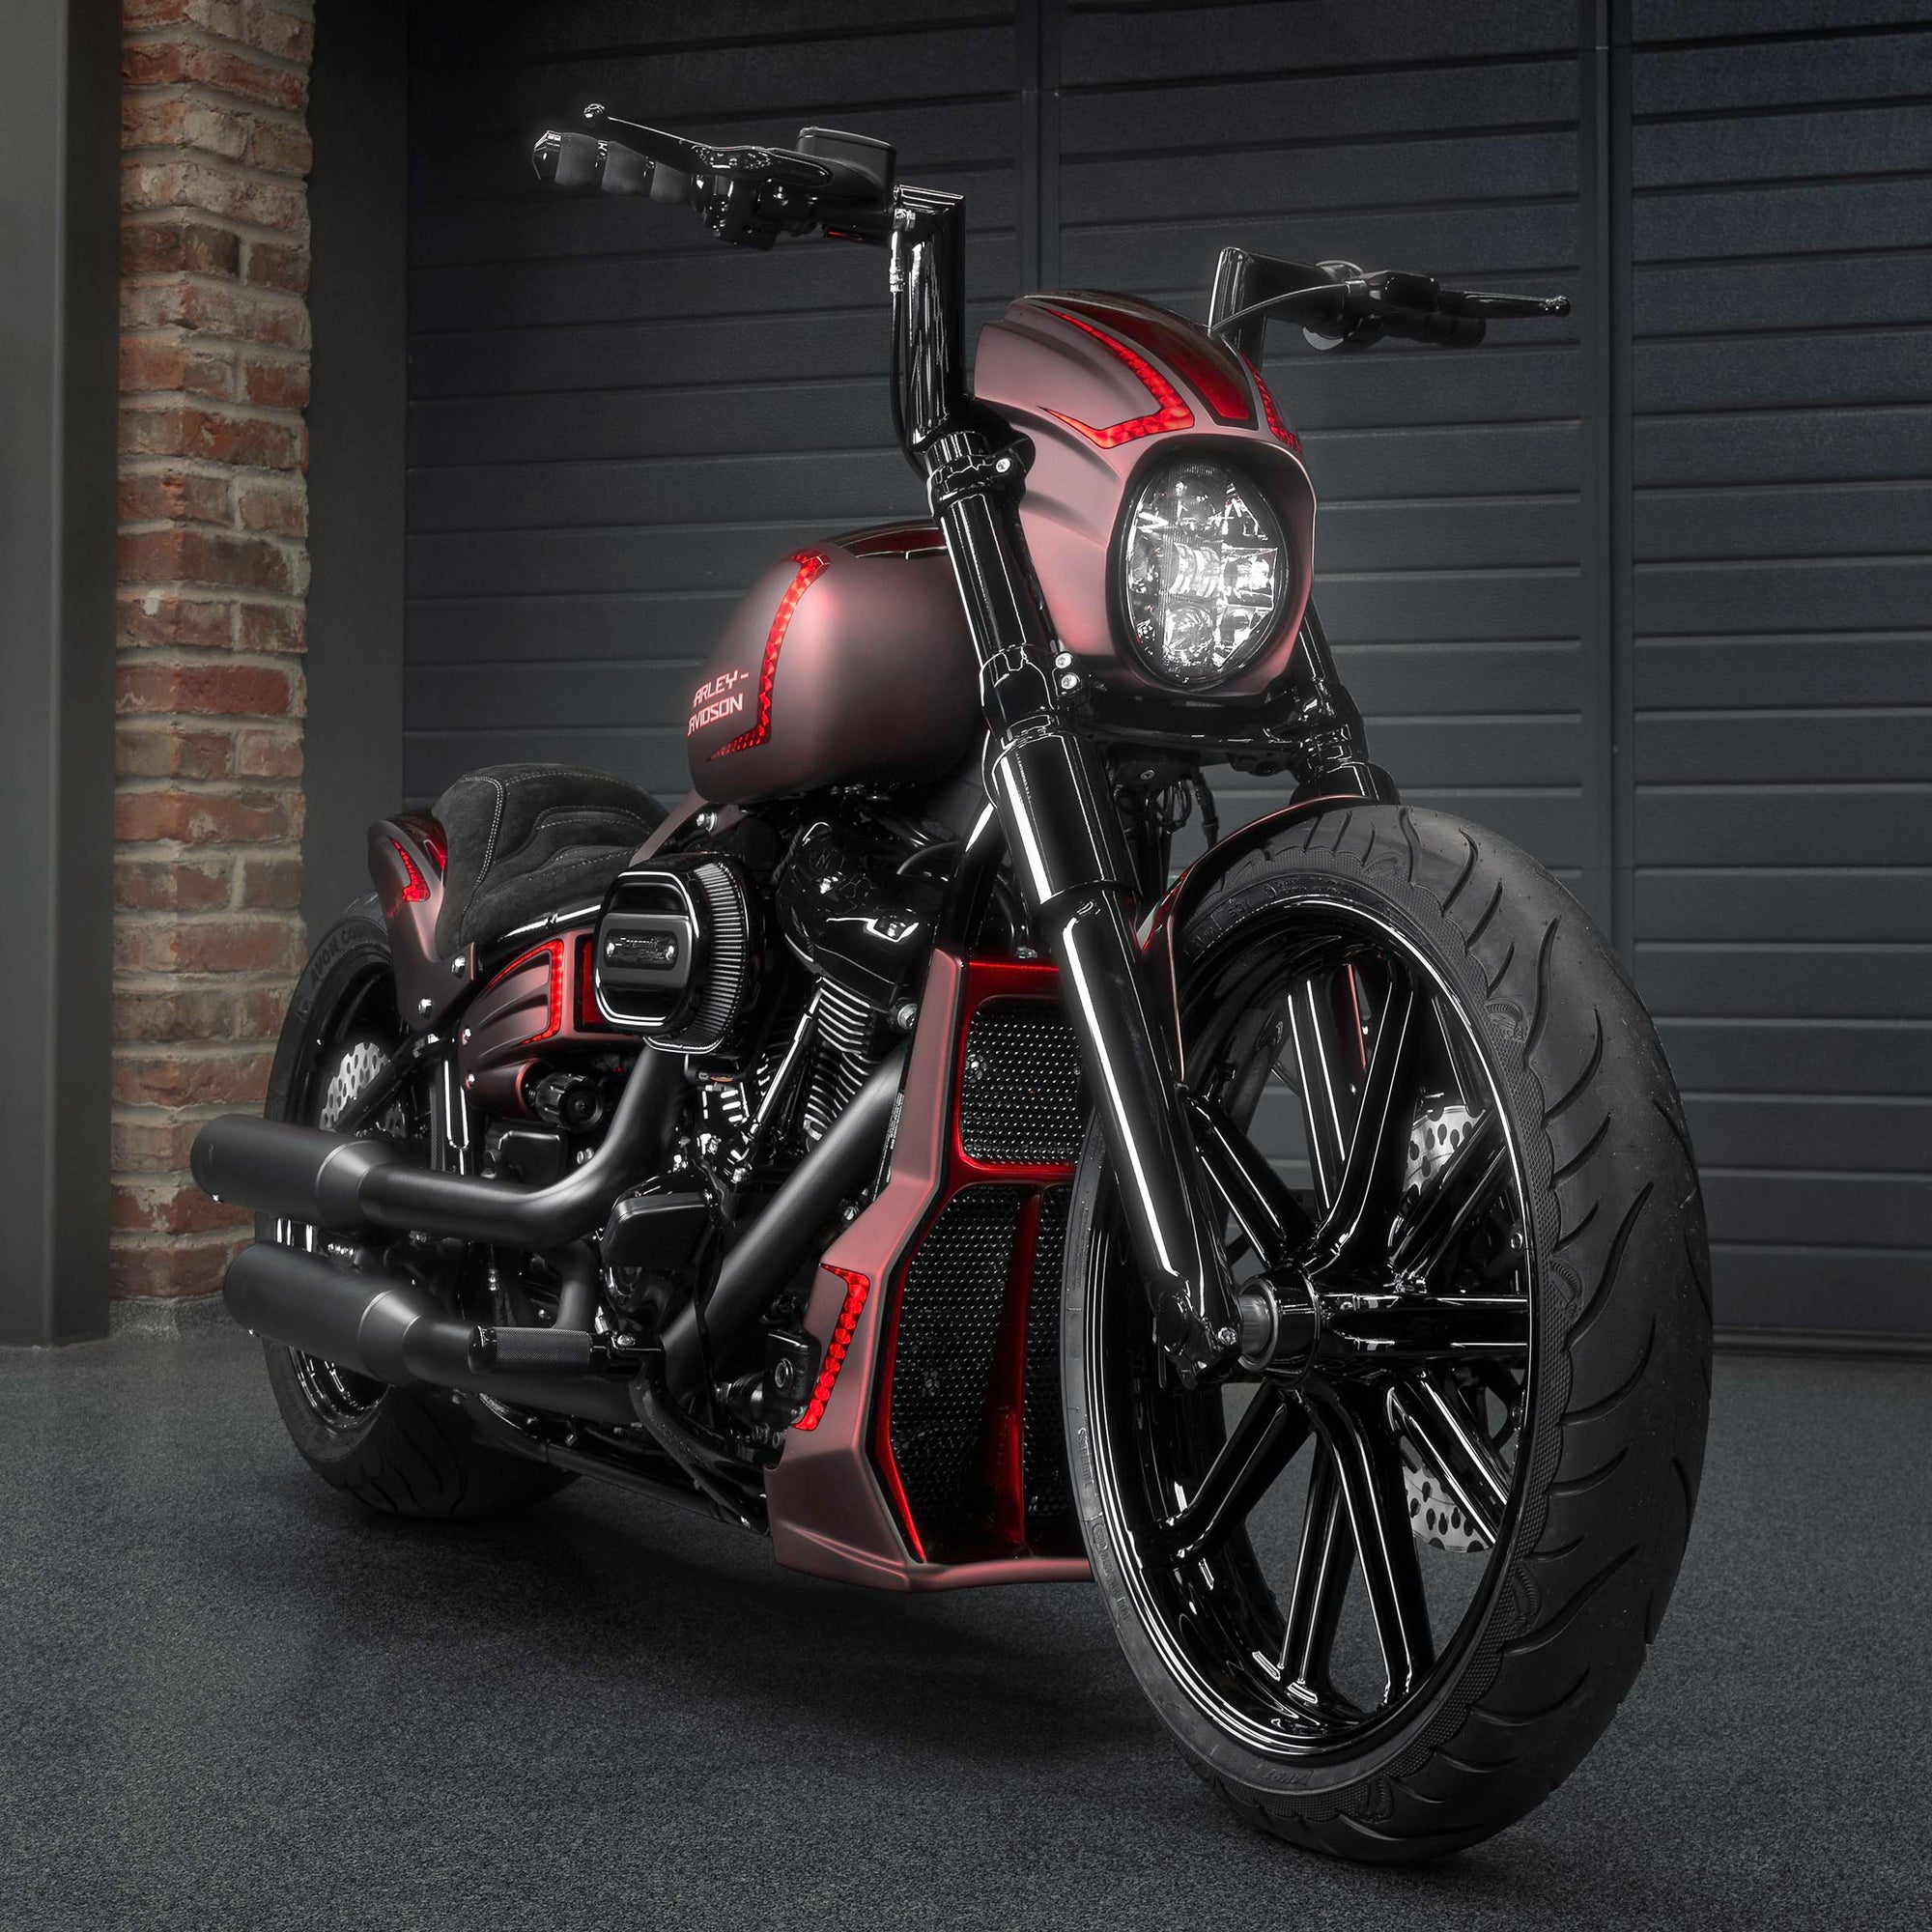 Harley Davidson motorcycle with Killer Custom parts from the front in a modern garage